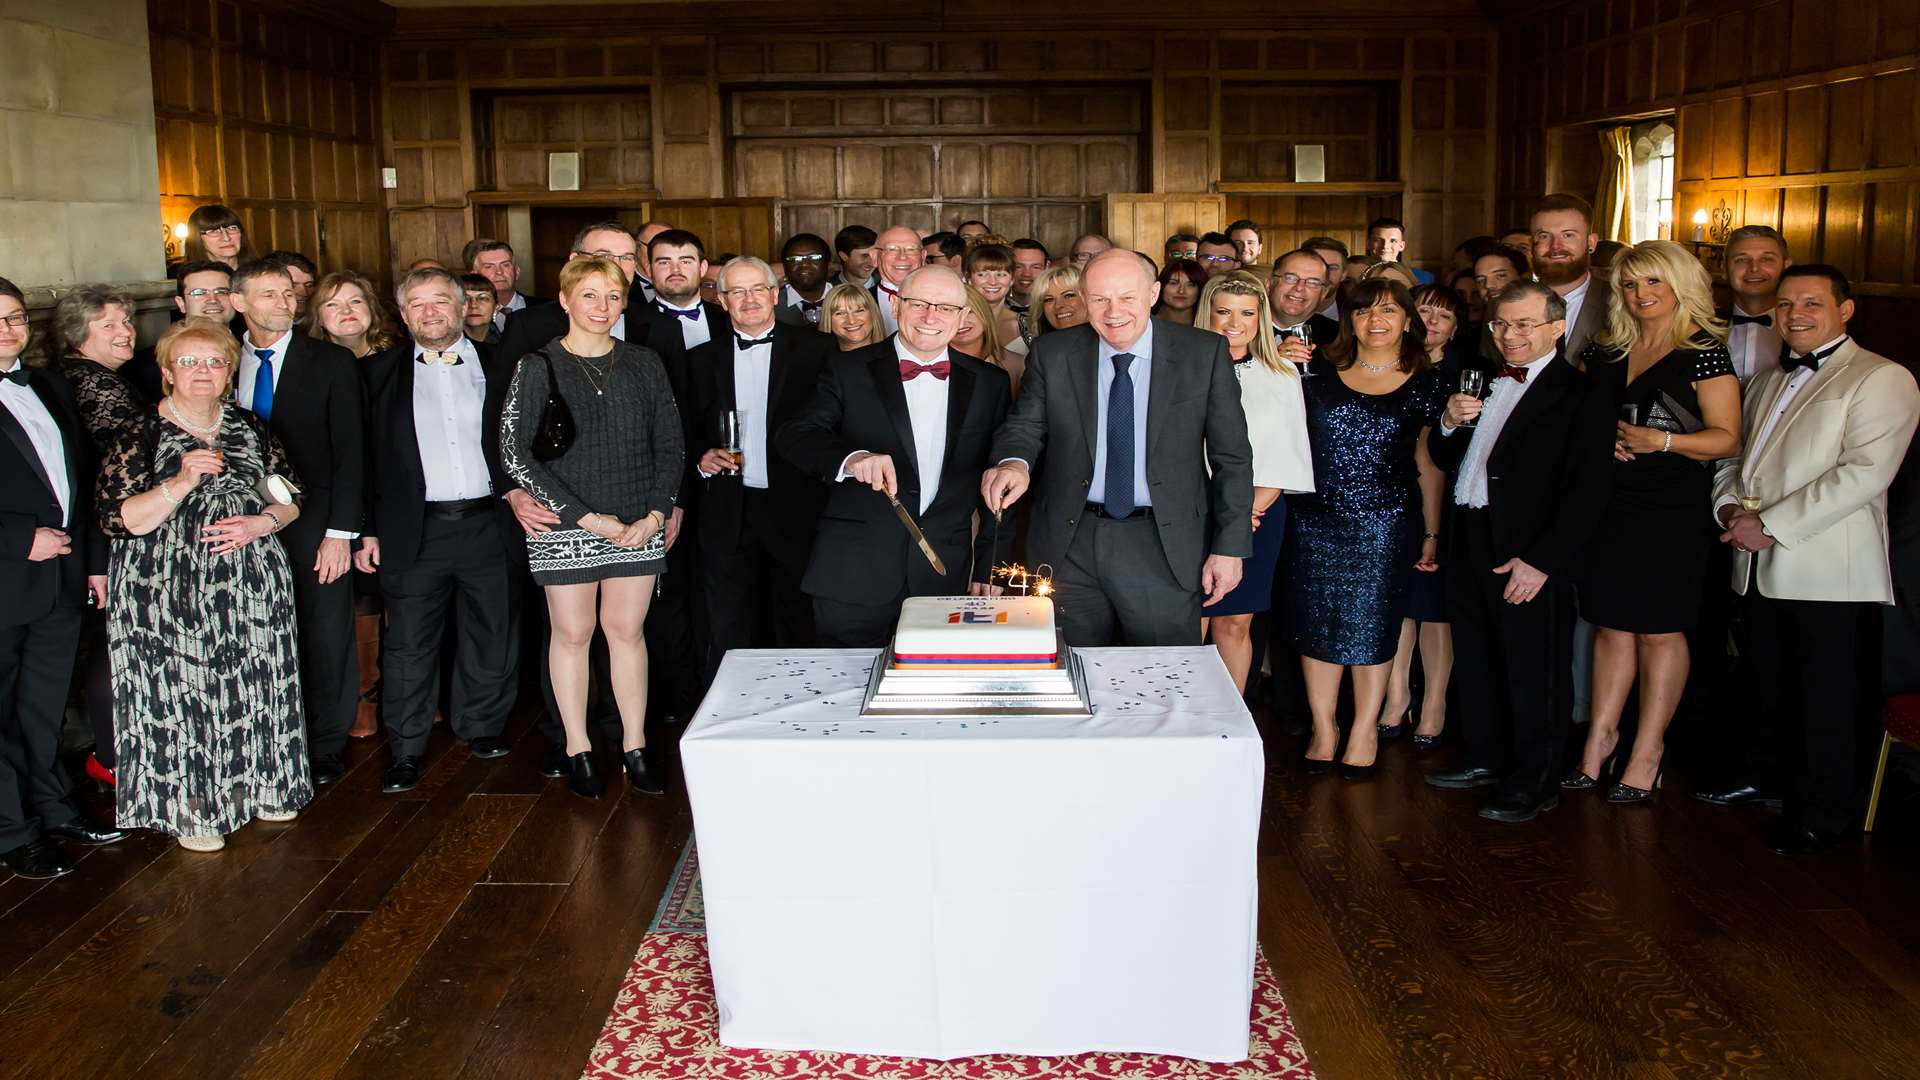 ITL chief executive Tom Cole, left, cuts the firm's 40th birthday cake with Ashford MP Damian Green at Lympne Castle